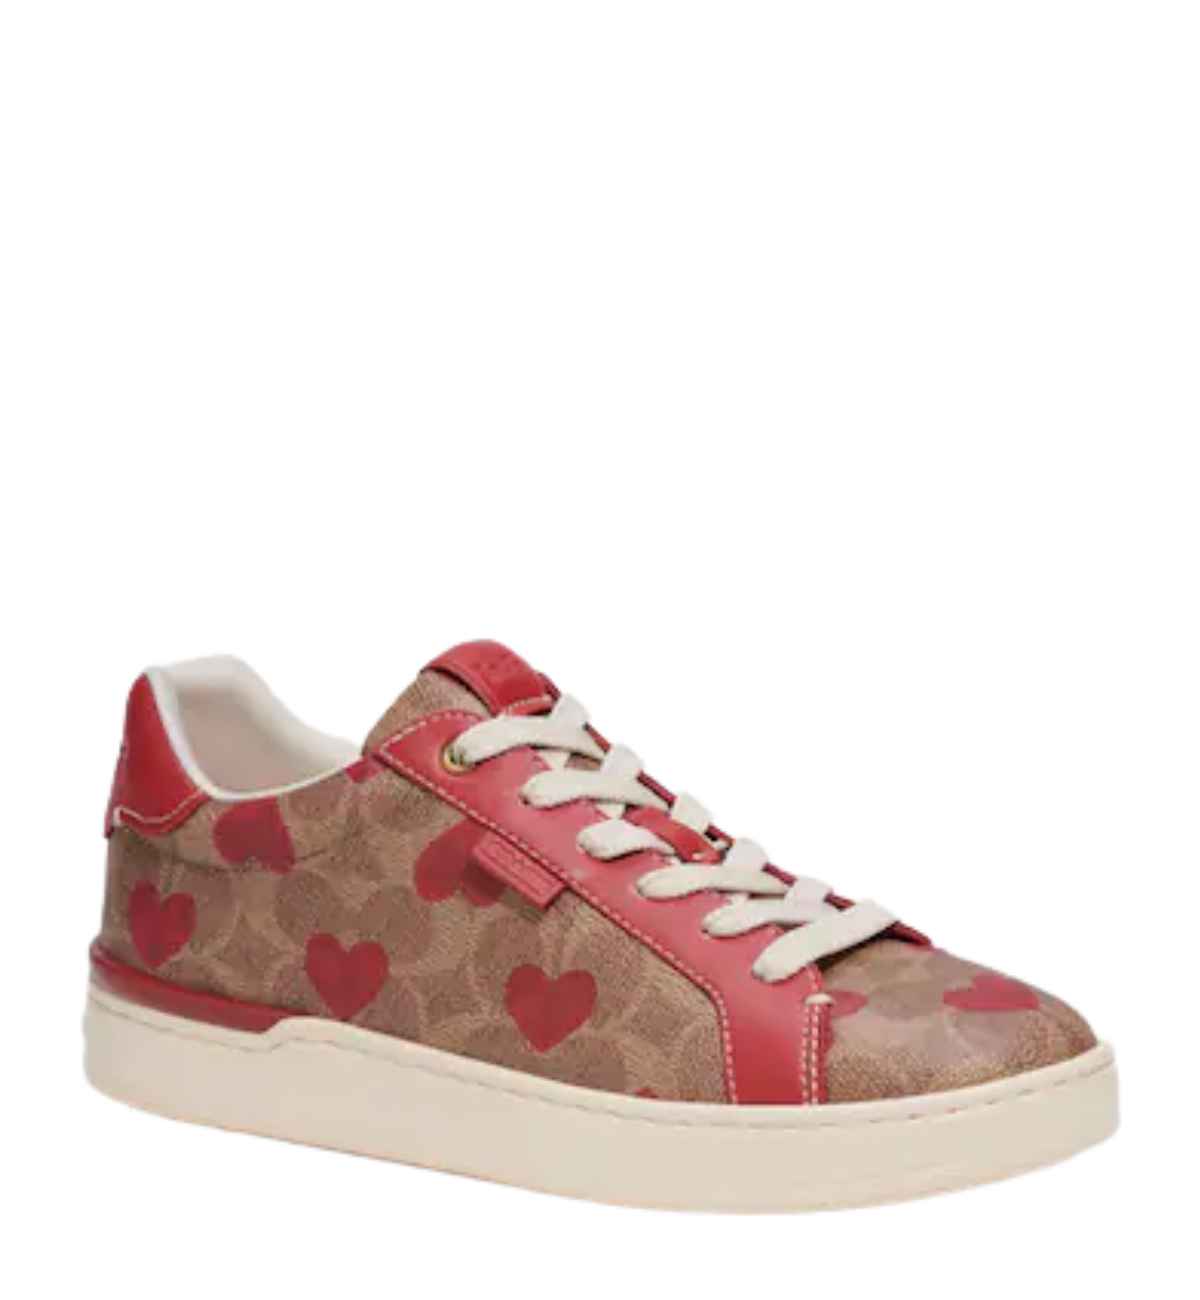 Brown sneaker with heart pattern all over on white background.